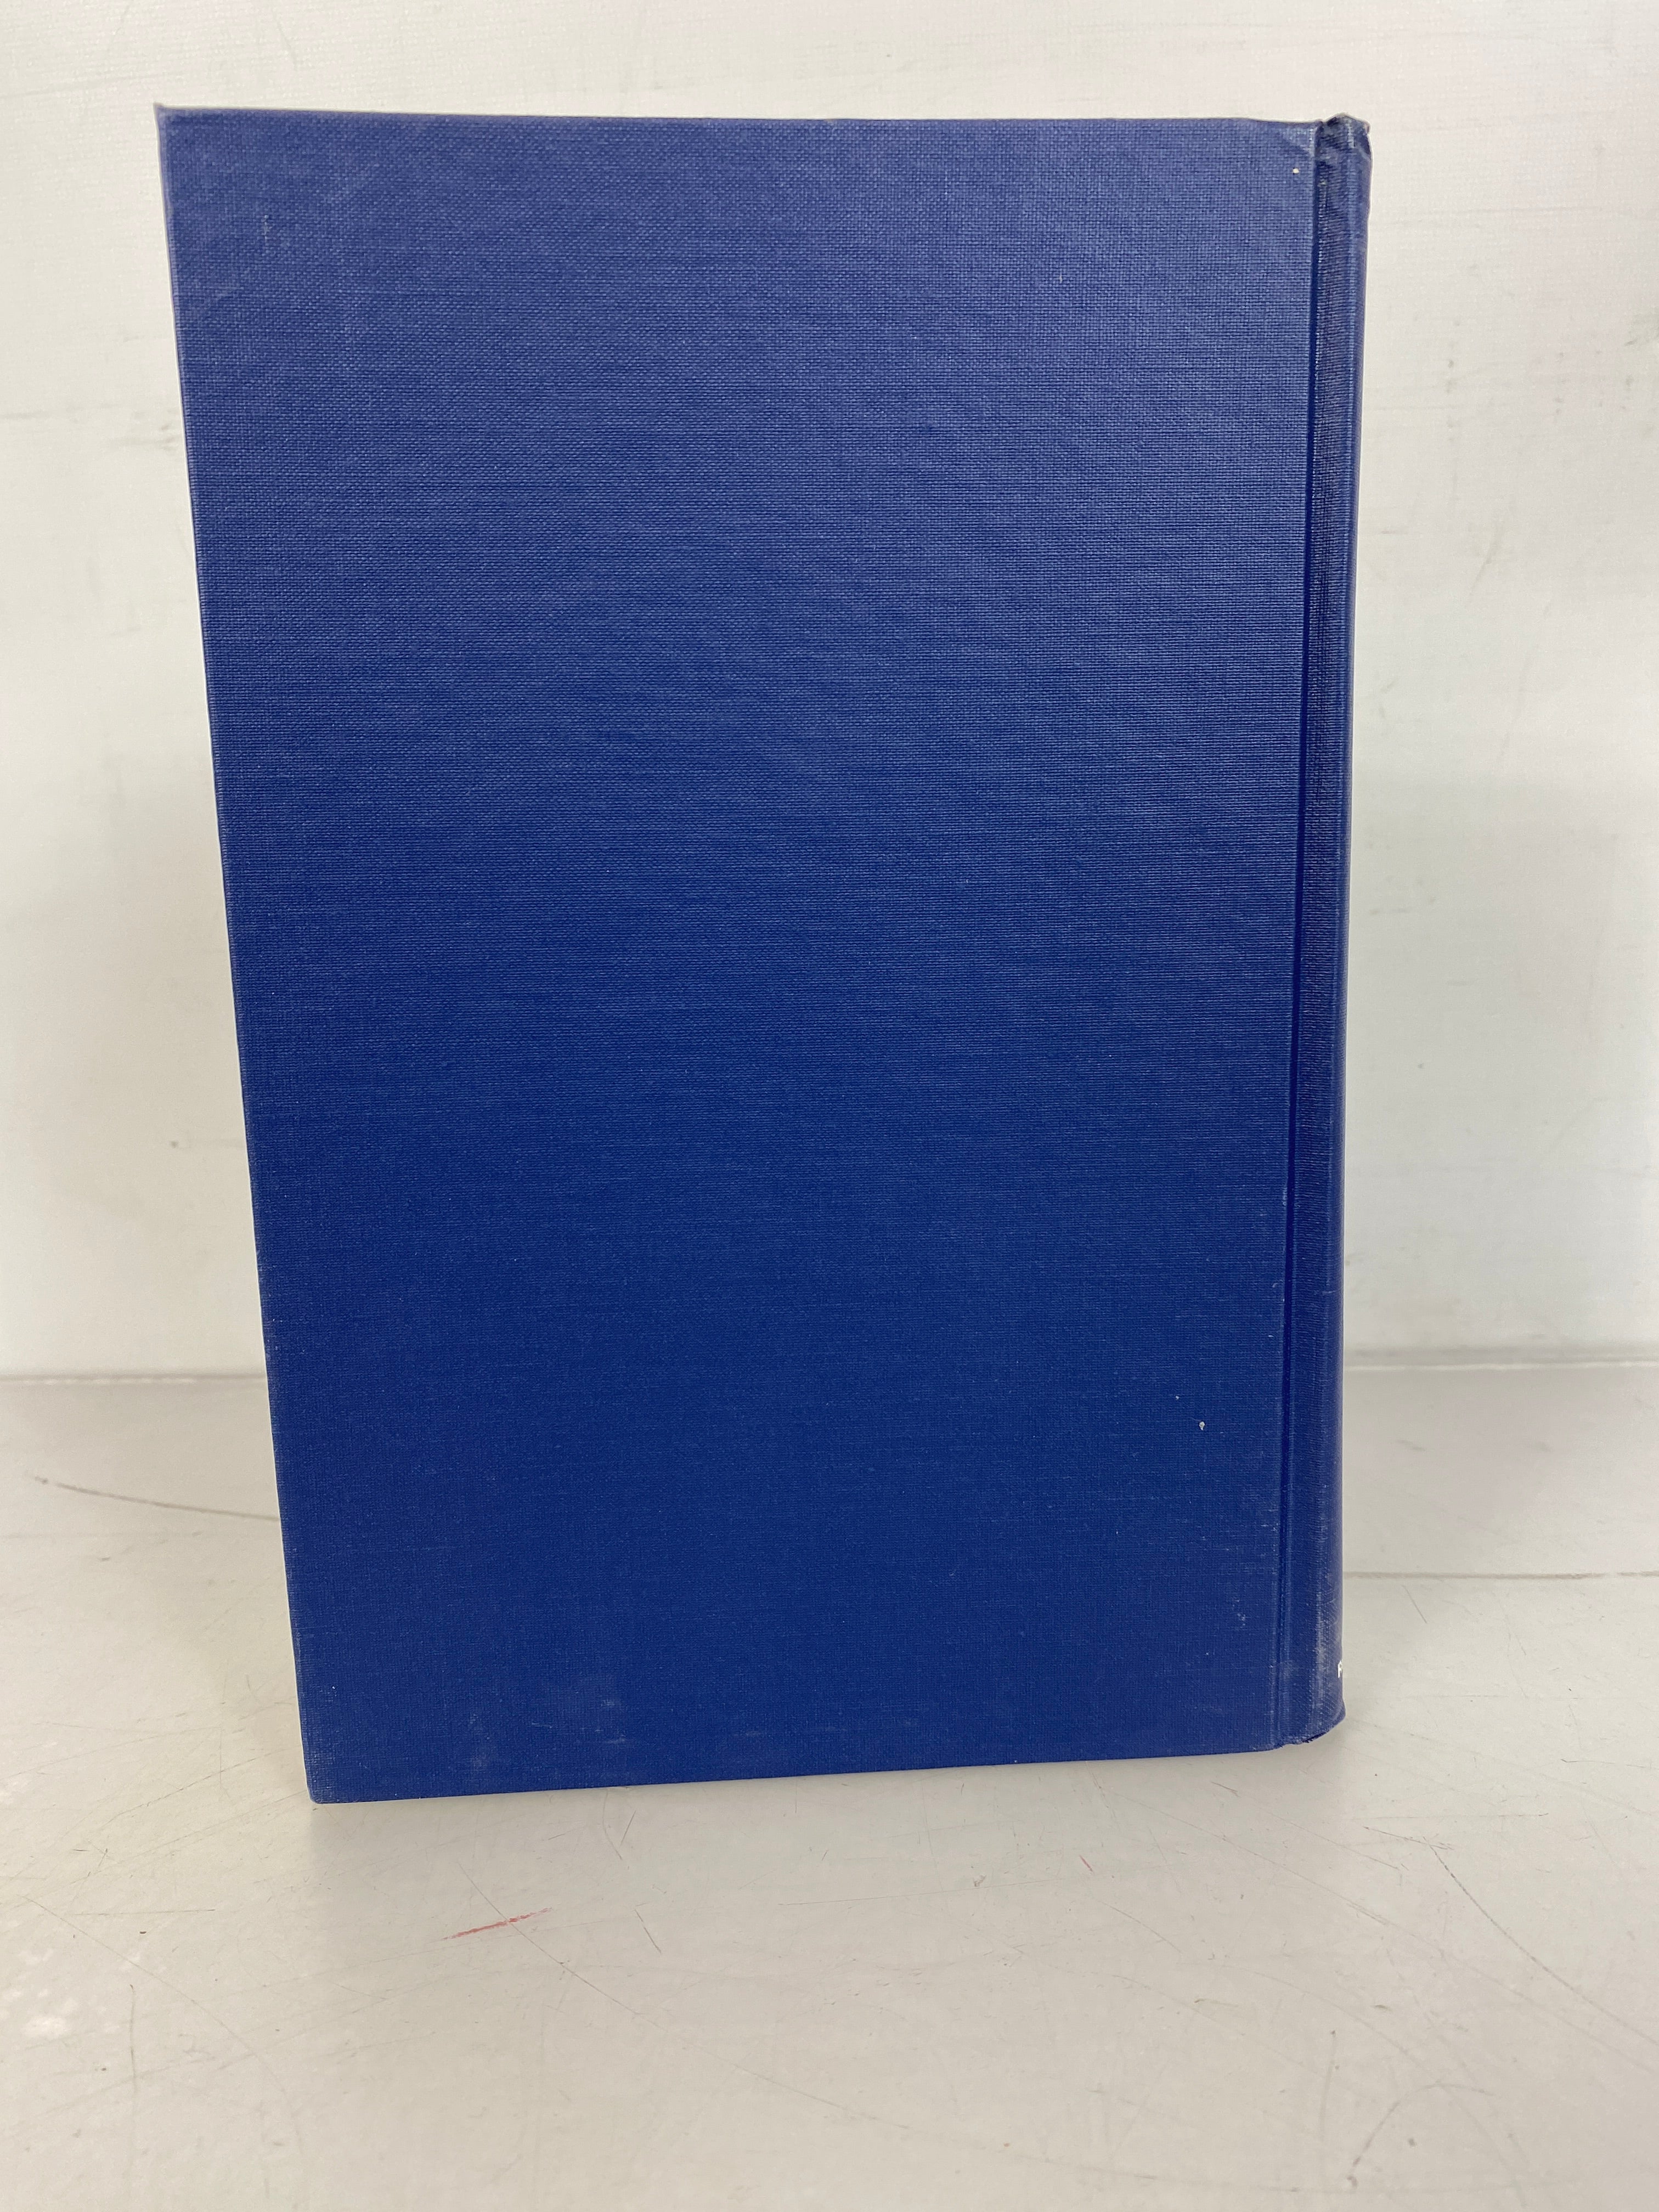 America's Electric Utilities: Past, Present, and Future by Leonard Hyman 1983 HC